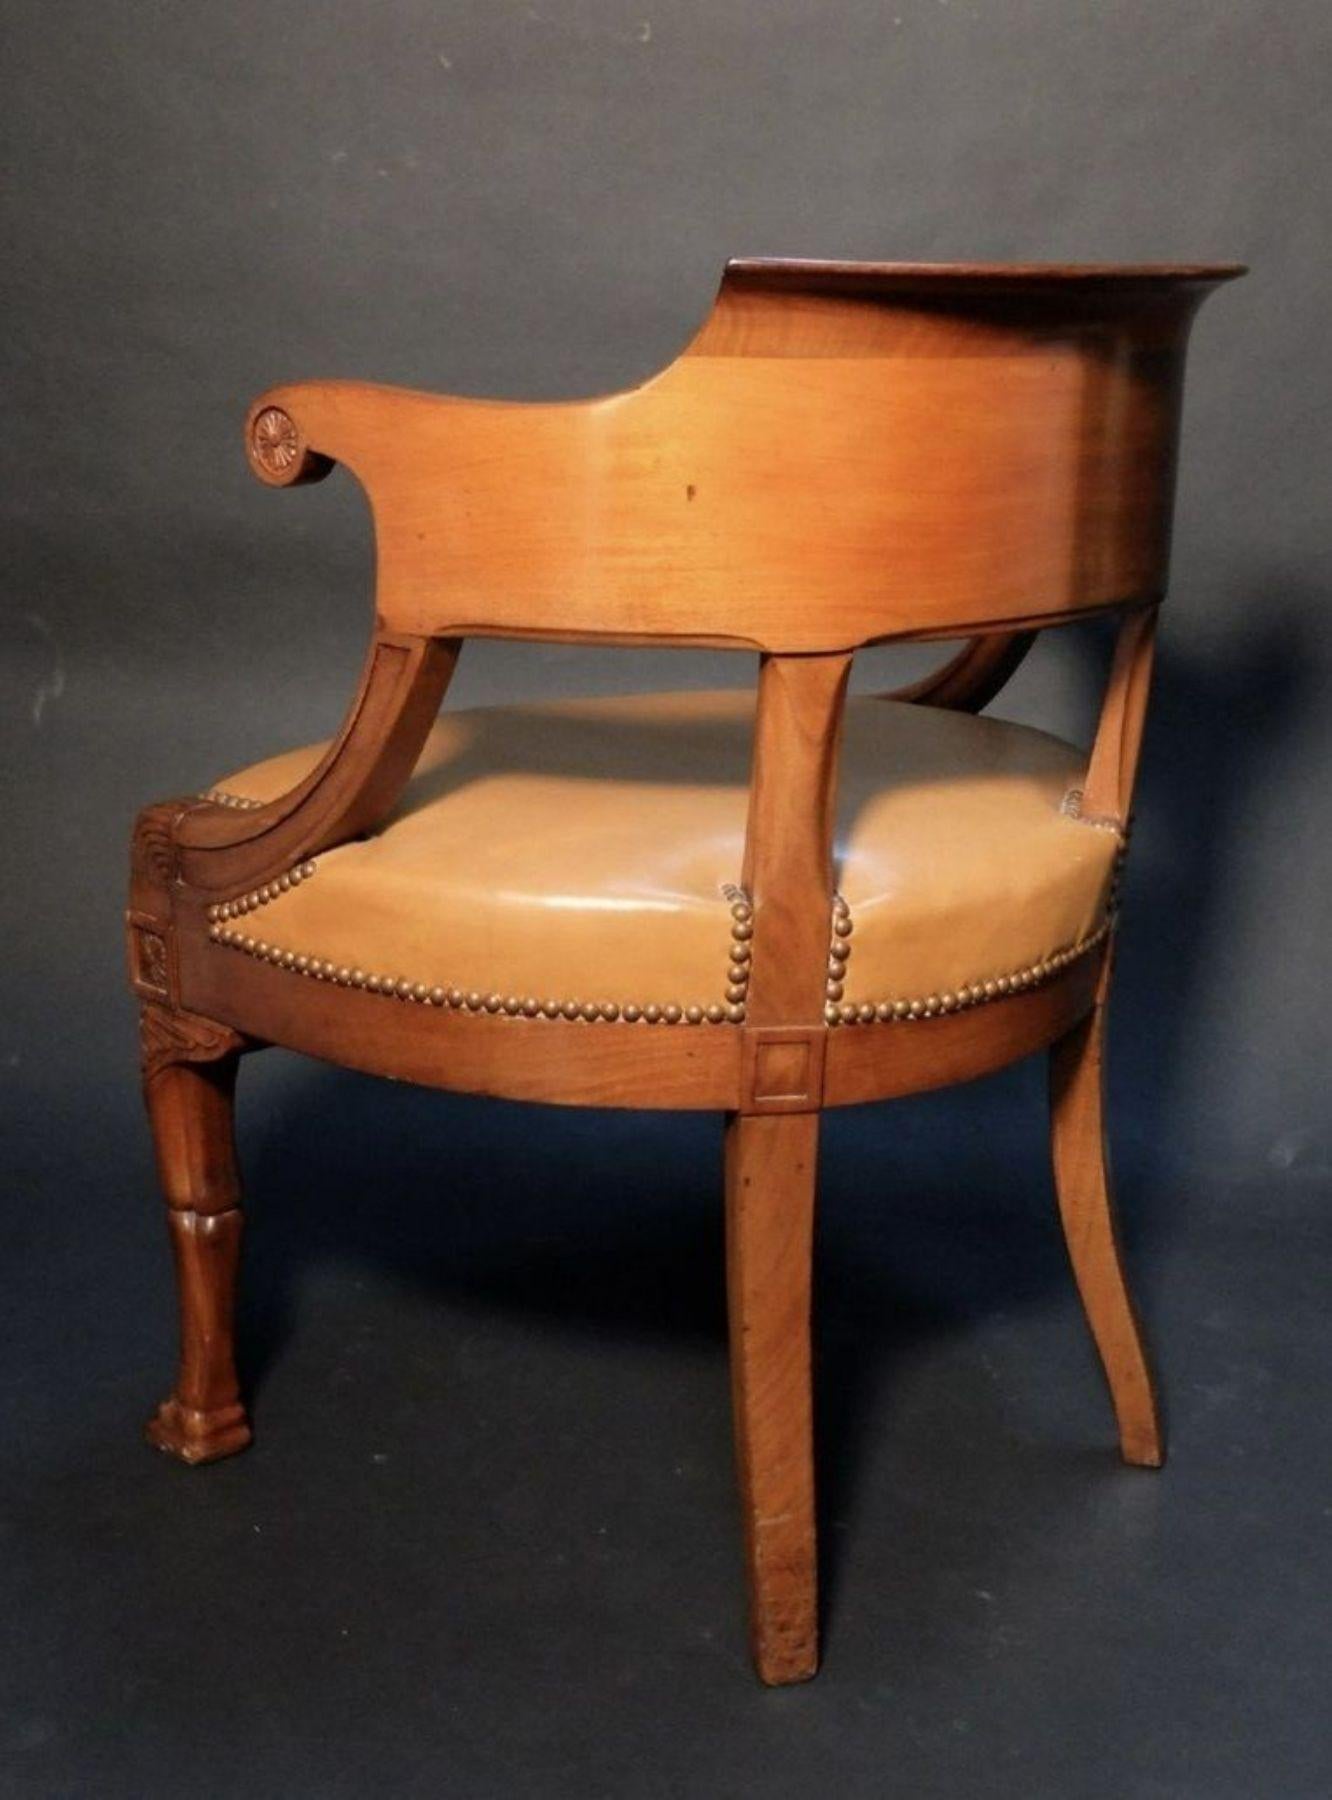 Hand-Carved Empire Mahogany Desk Chair, Early 19th Century For Sale